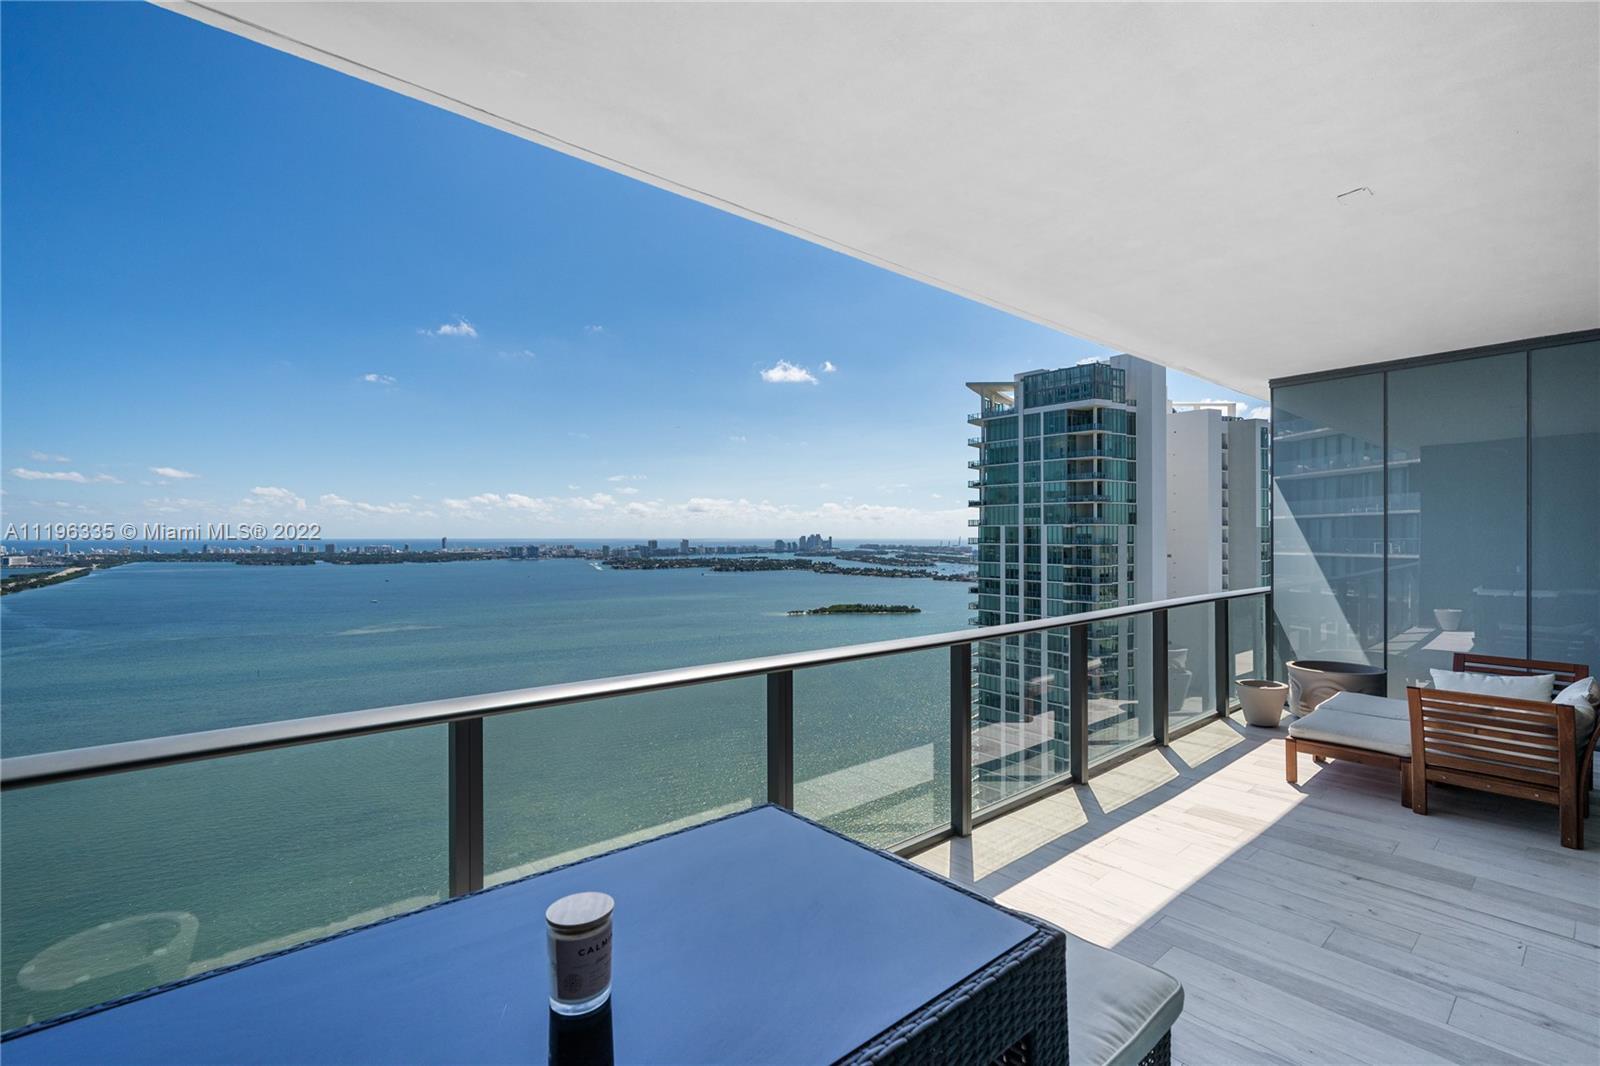 Miami Luxury life style in this amazing condo at Gran Paraiso designed by renowned architect Piero L